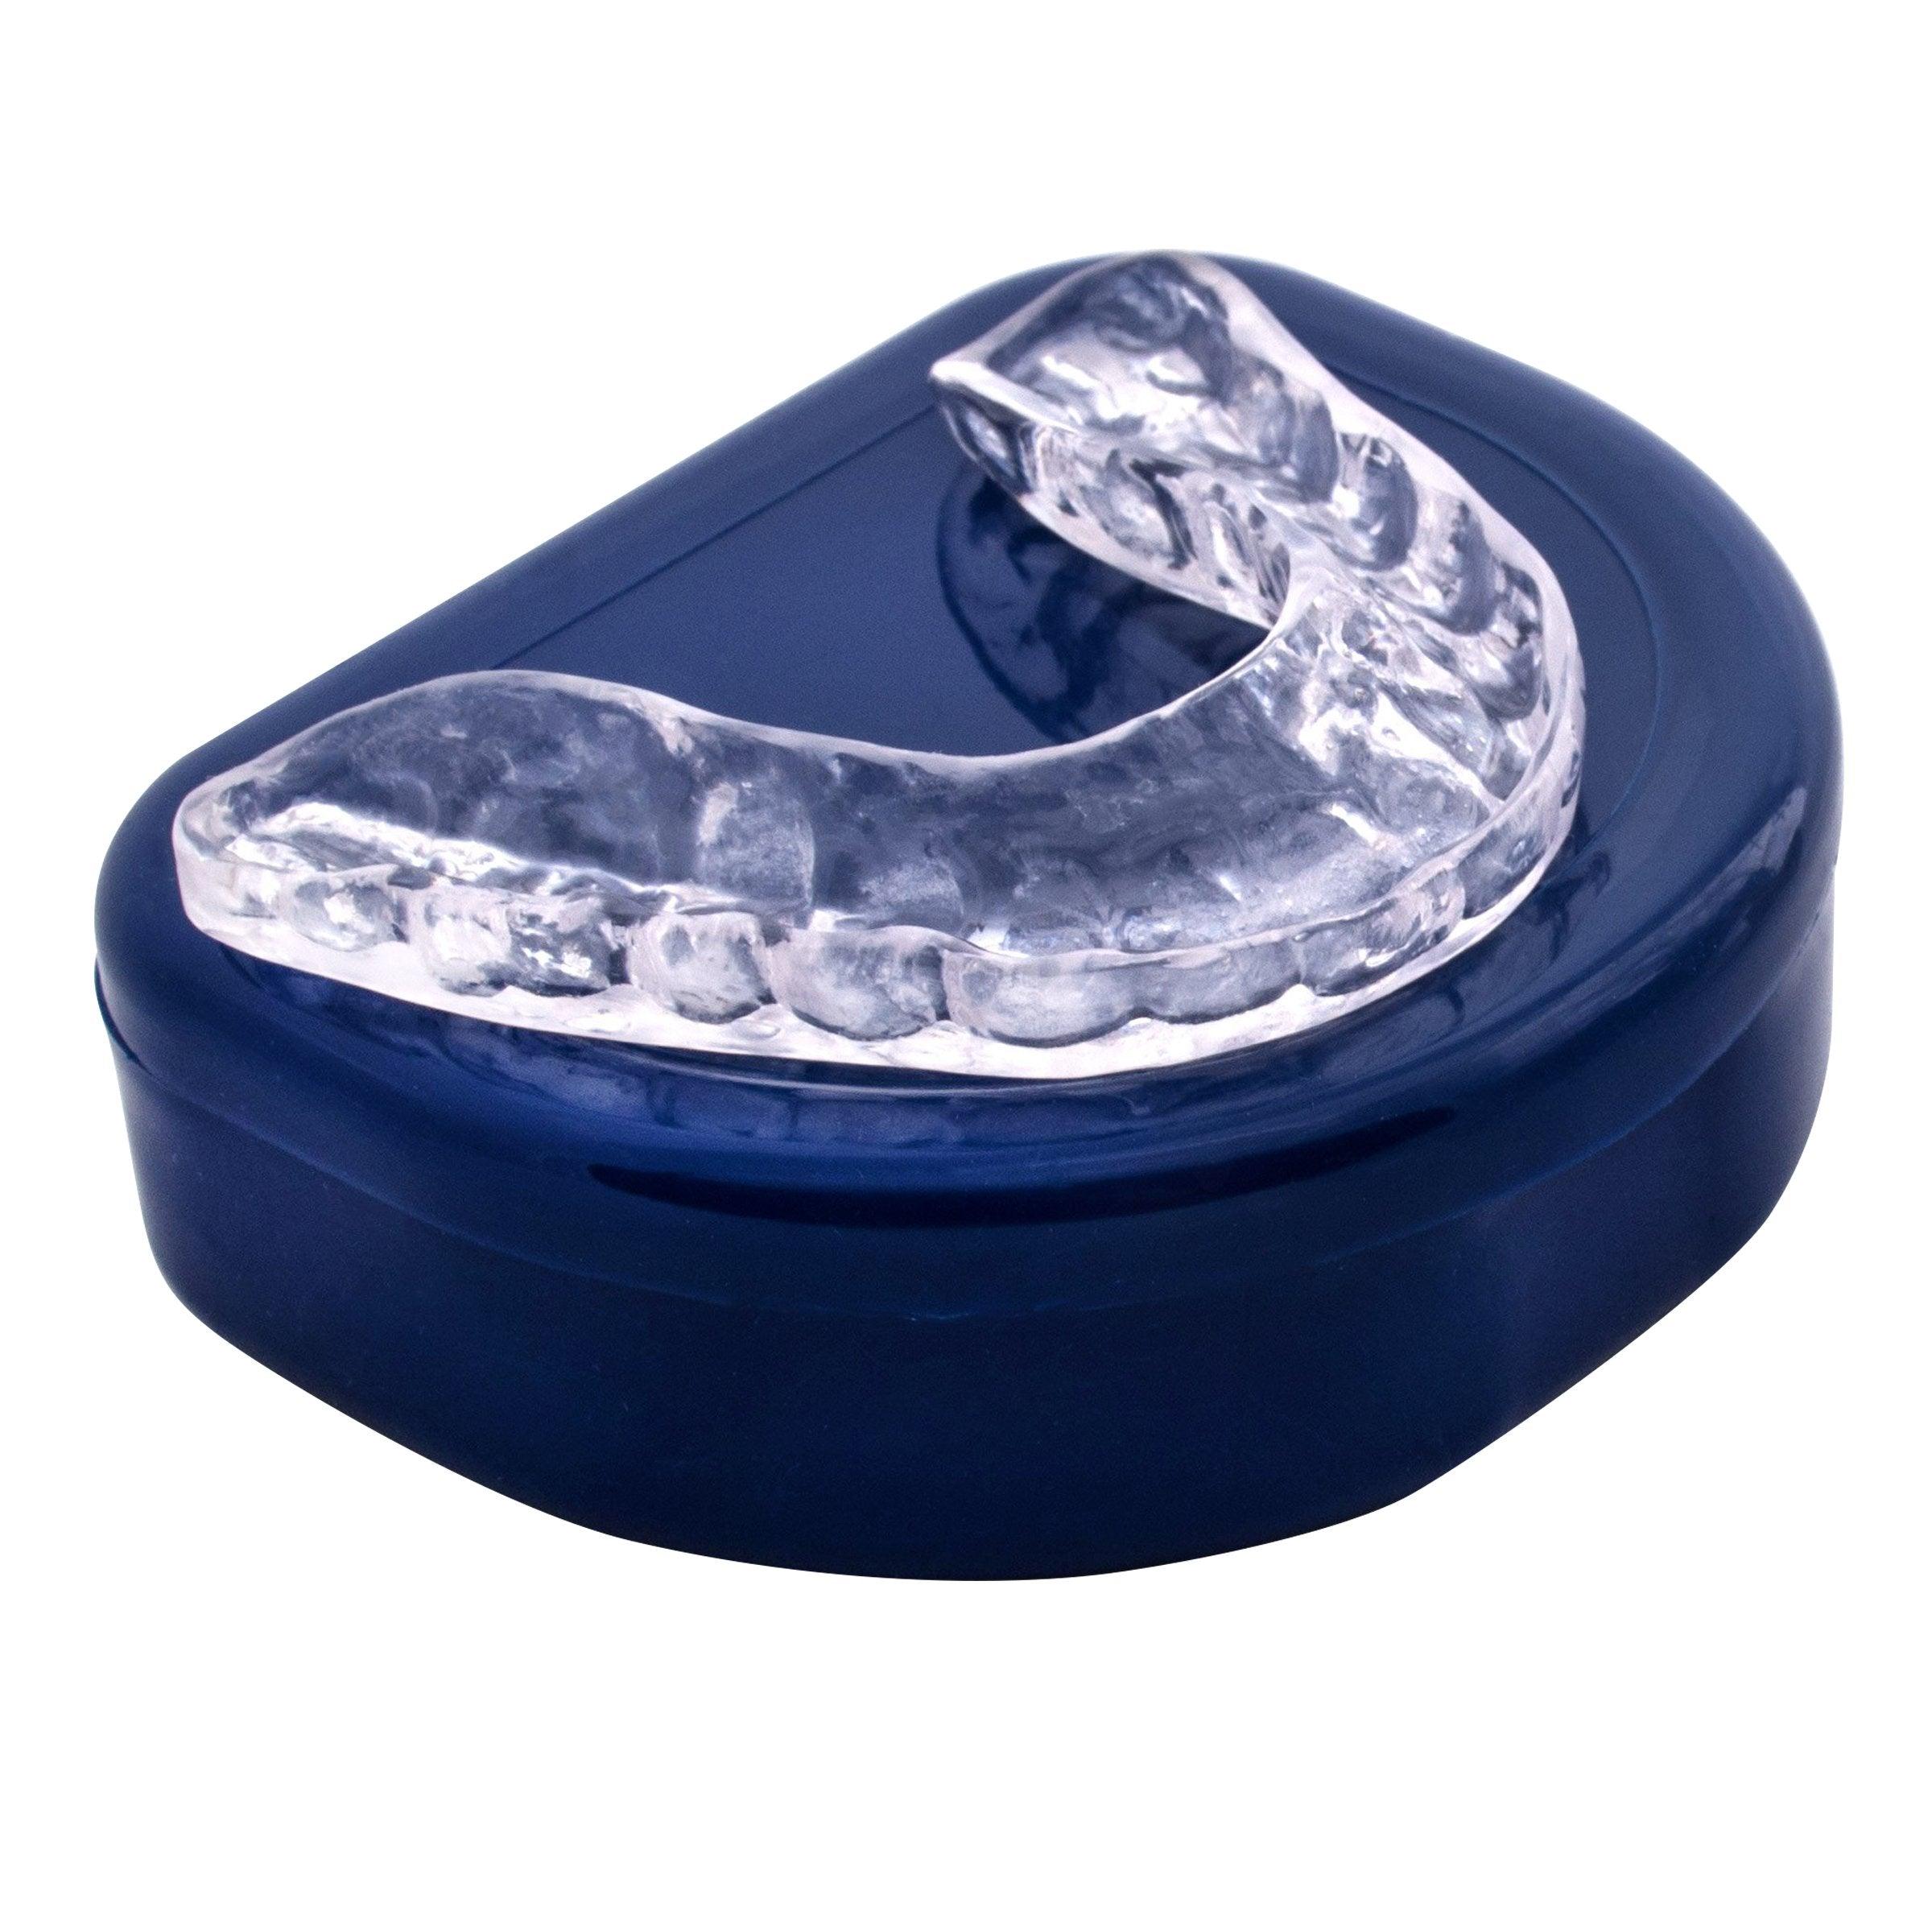 Mouth Guard and Night Guard